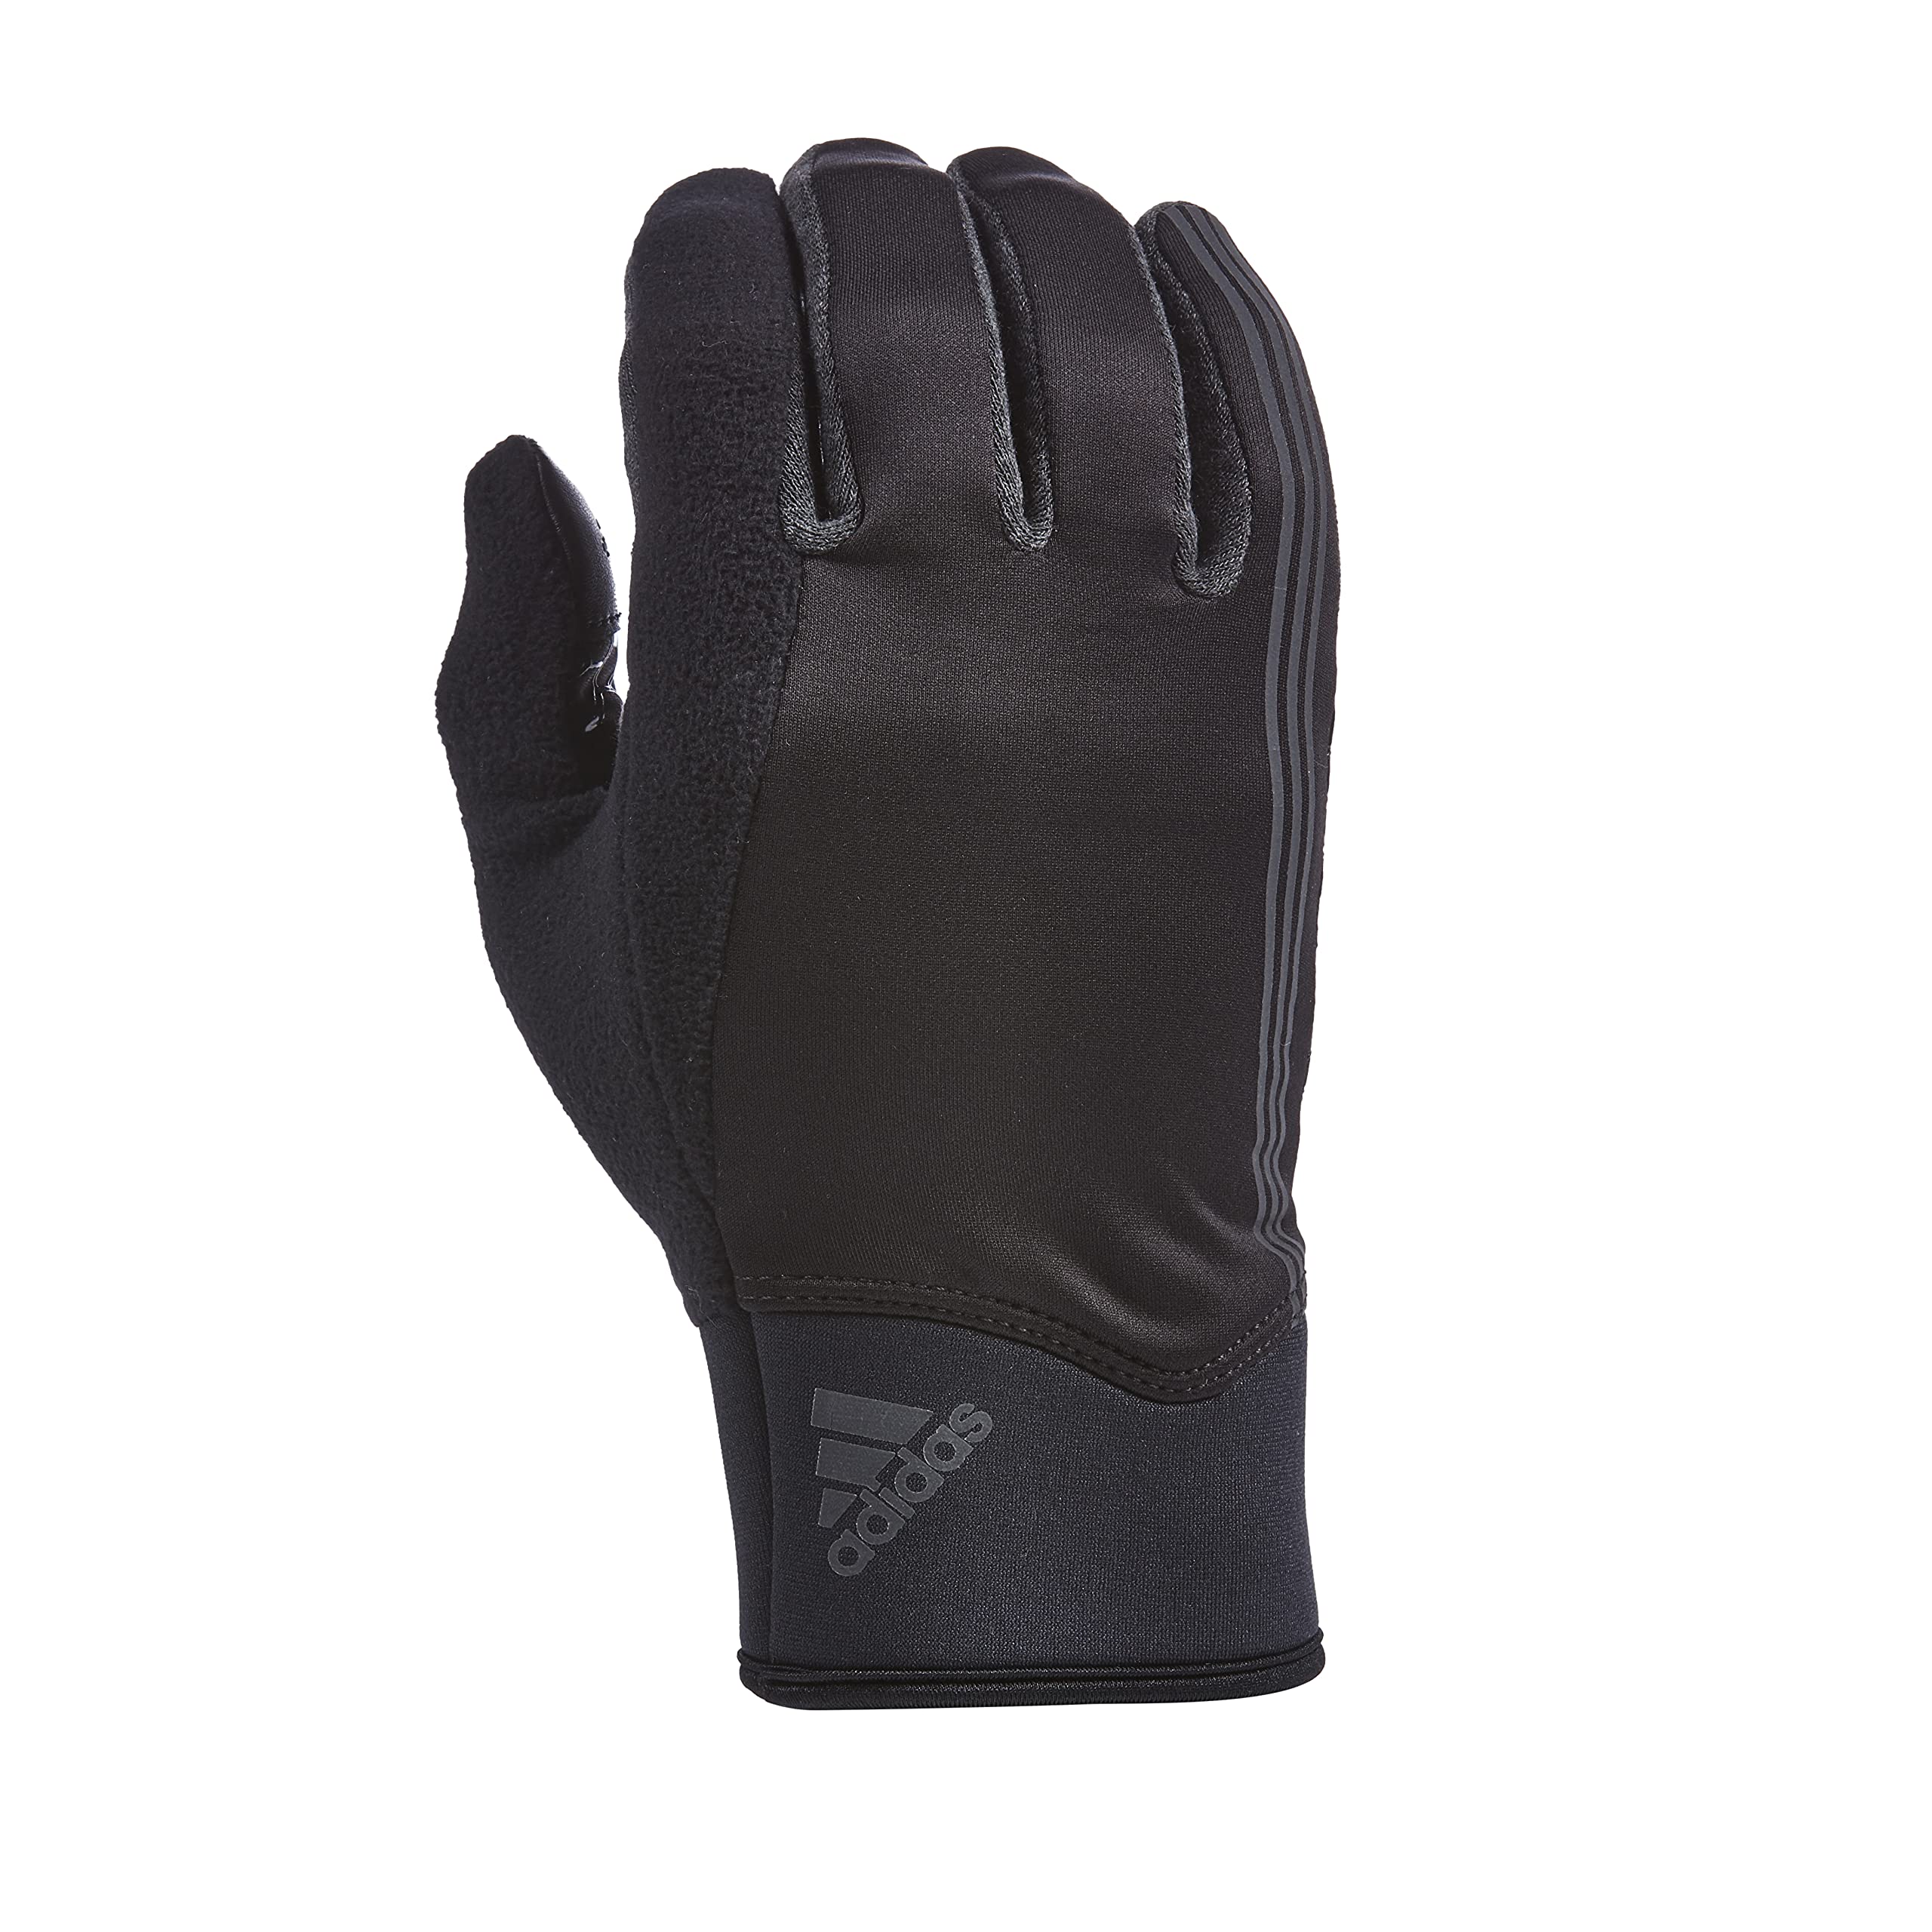 adidas Winter Performance Prime Glove with Honeycomb Matrix Palm for Grip and Touchscreen Conductivity Points - Multiple Styles